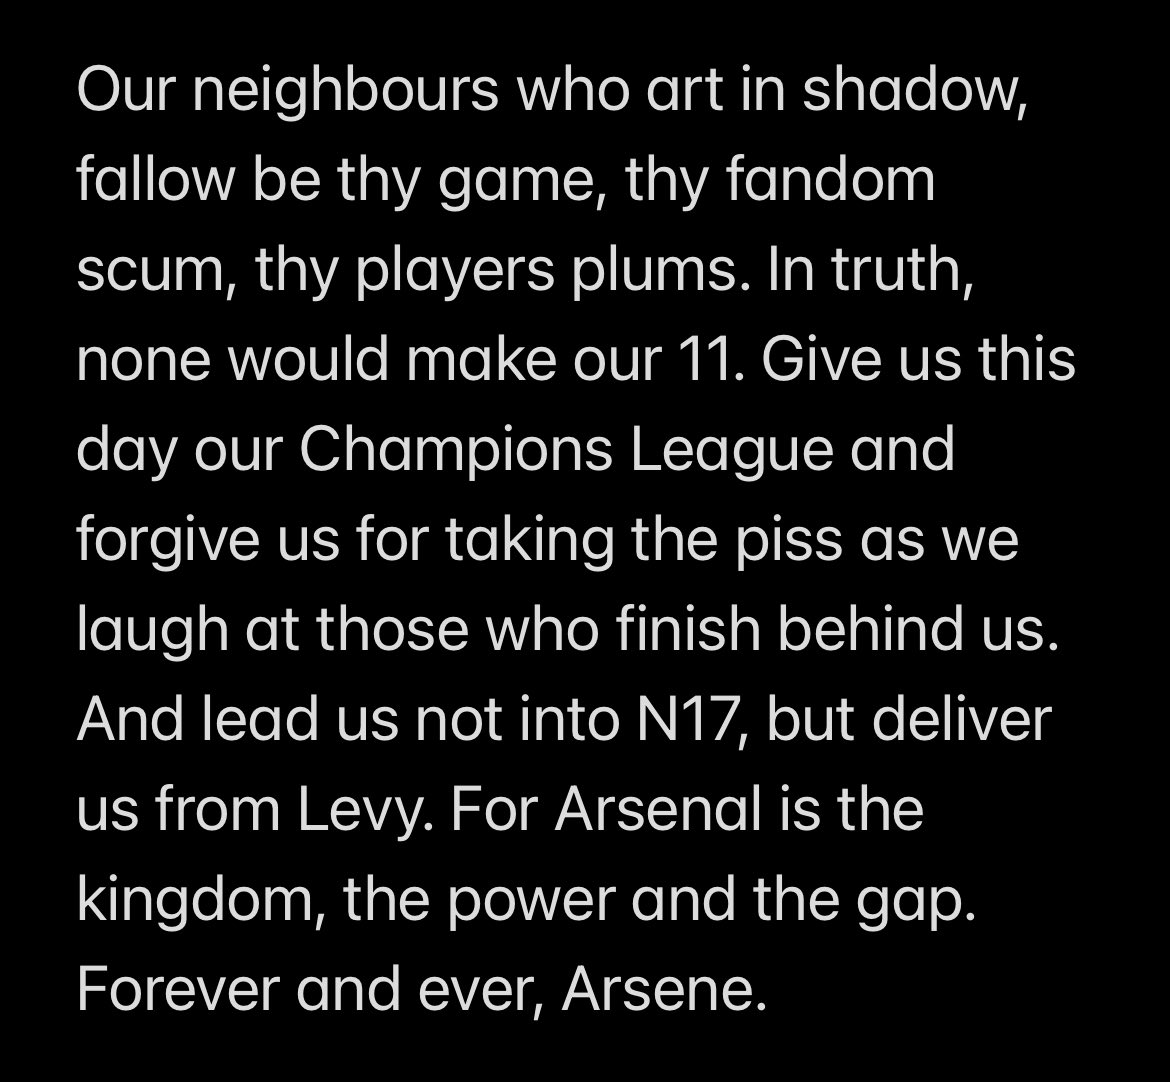 Prayer to St Totteringham for a Man Cheaty defeat tonight....
#TOTMCI